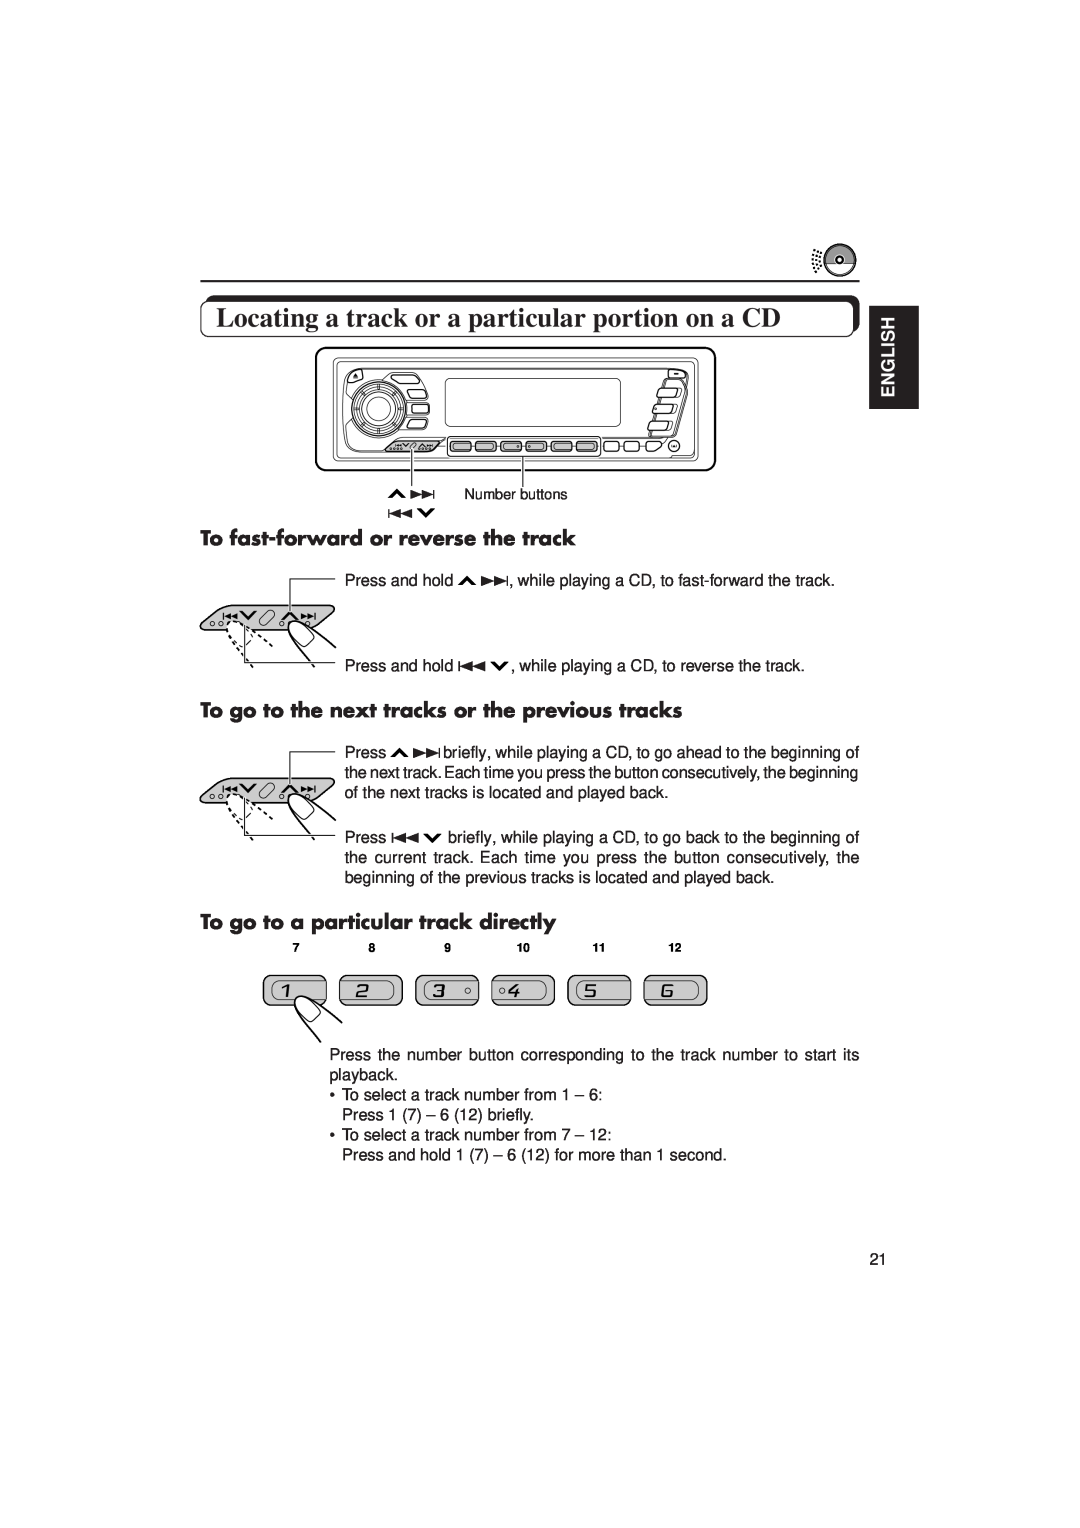 JVC KD-MX2900R manual Locating a track or a particular portion on a CD, To fast-forwardor reverse the track, English 